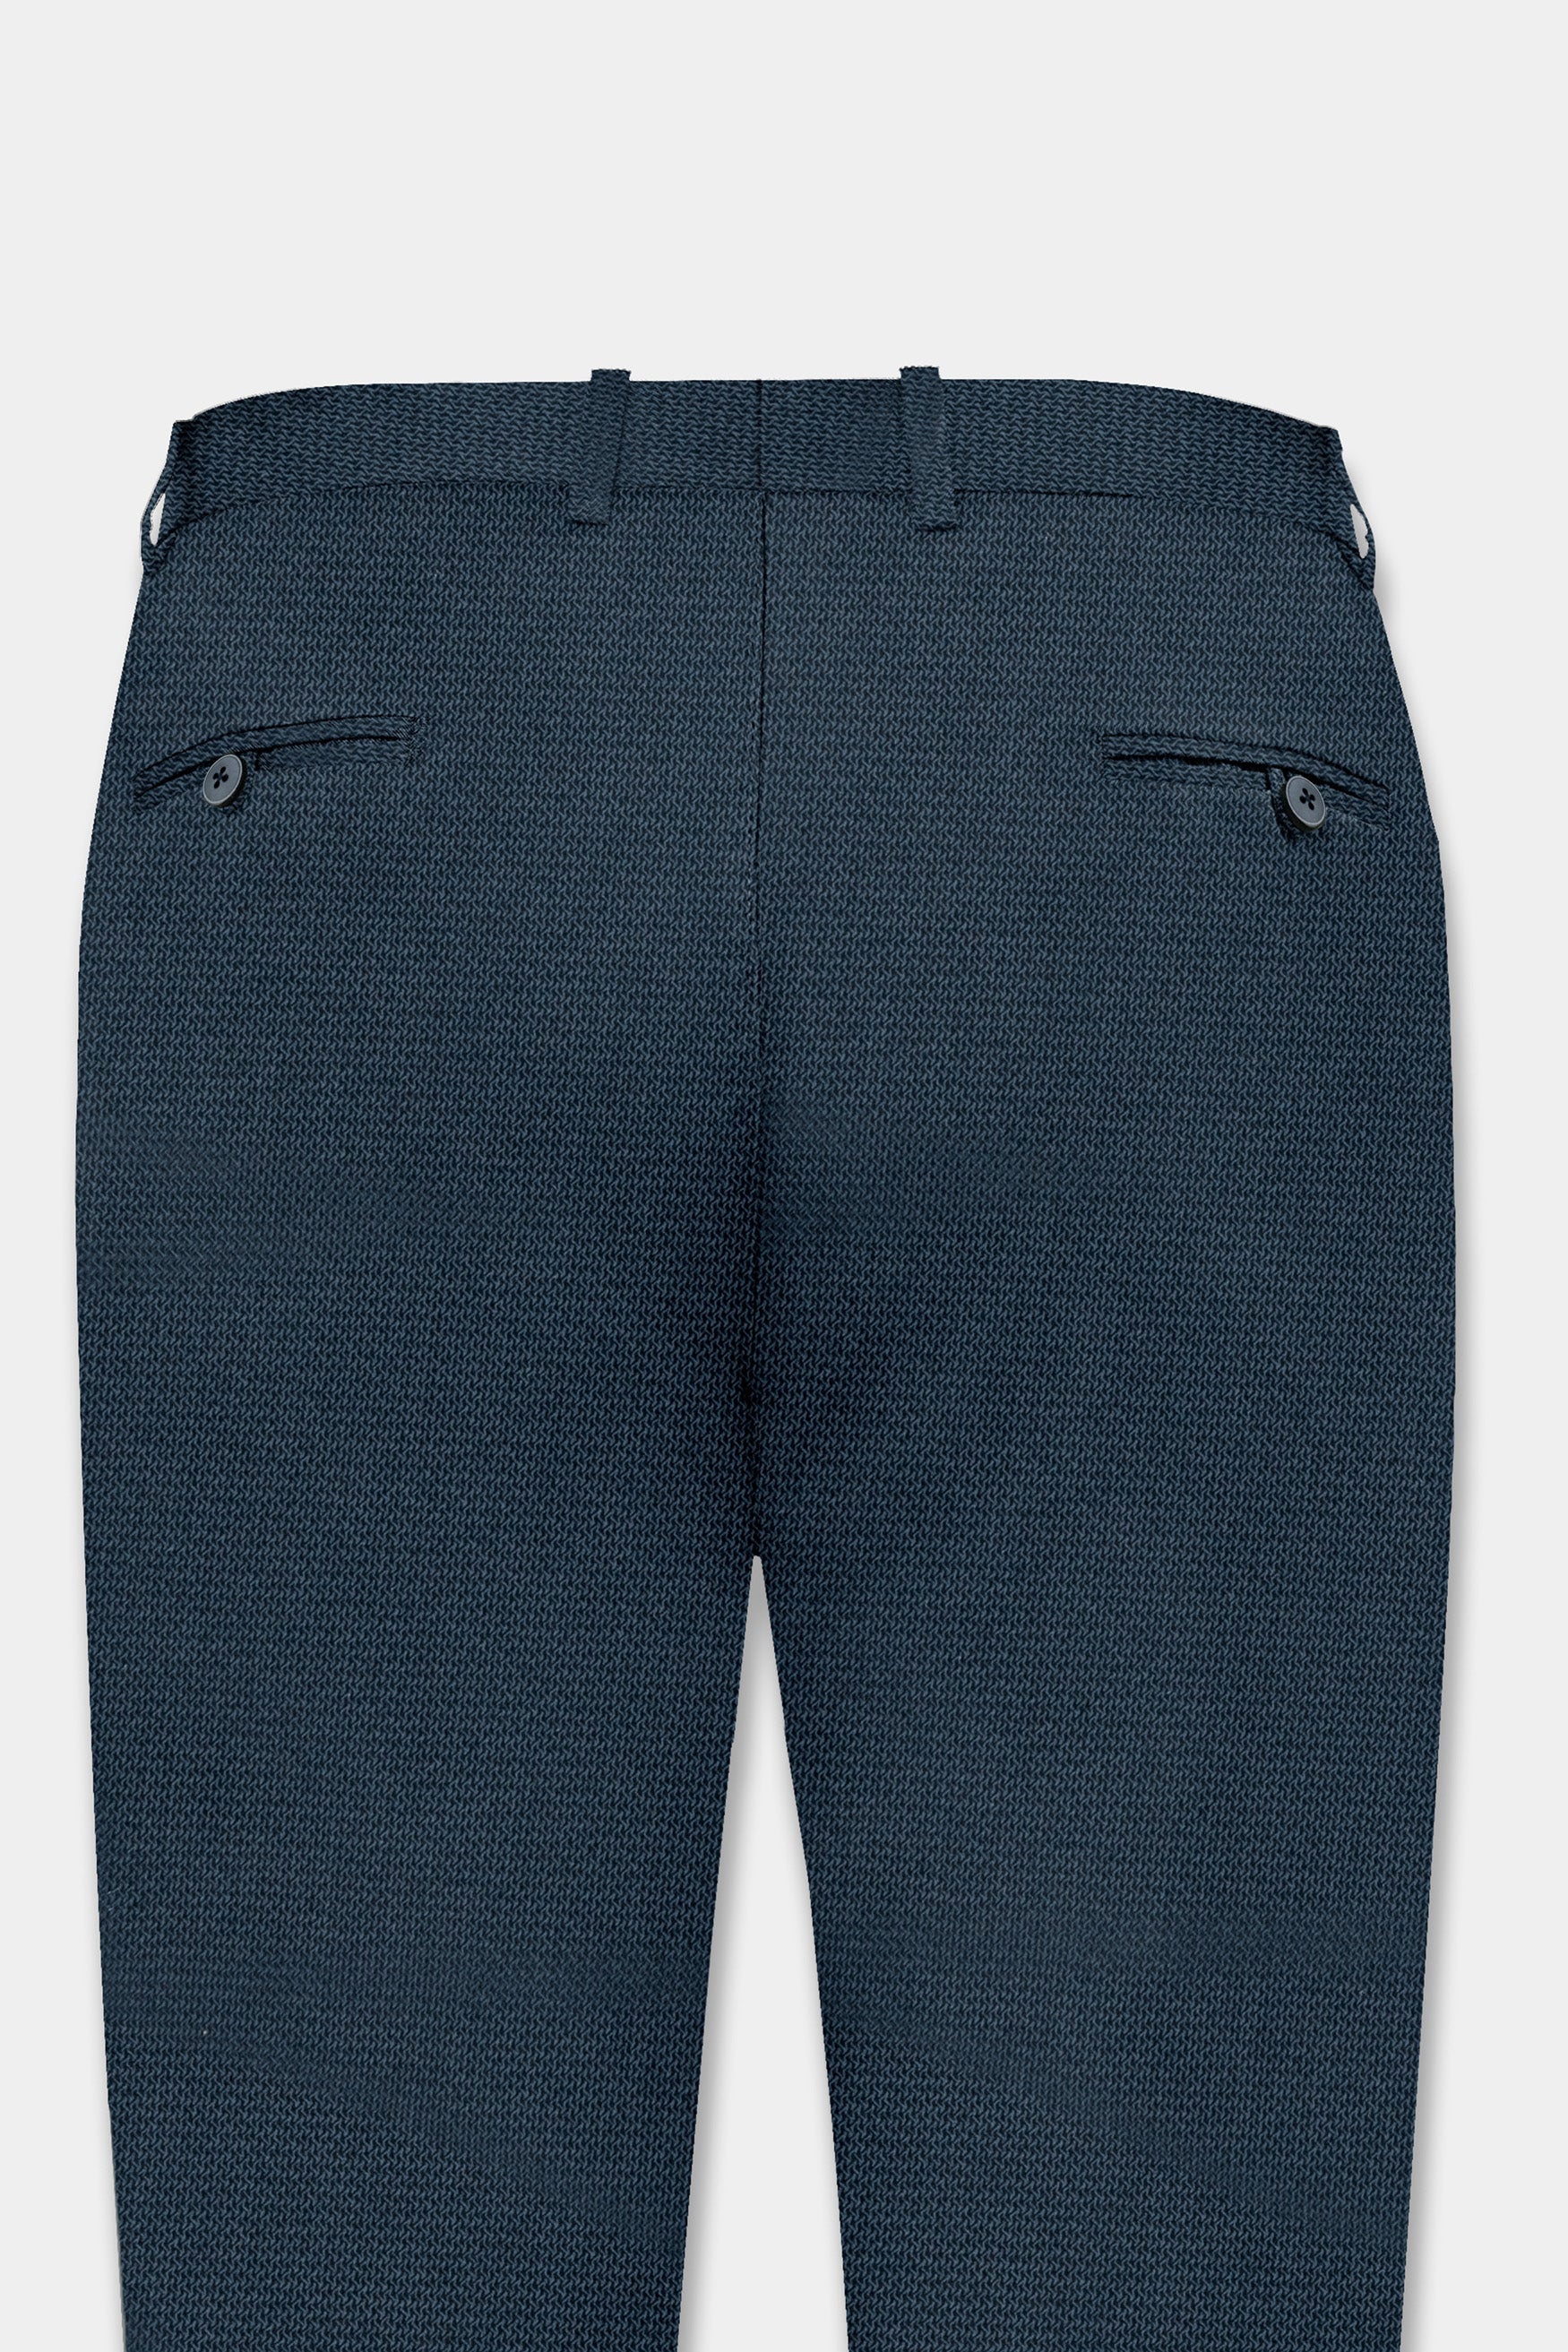 Firefly Blue textured Premium Cotton Chinos Pant